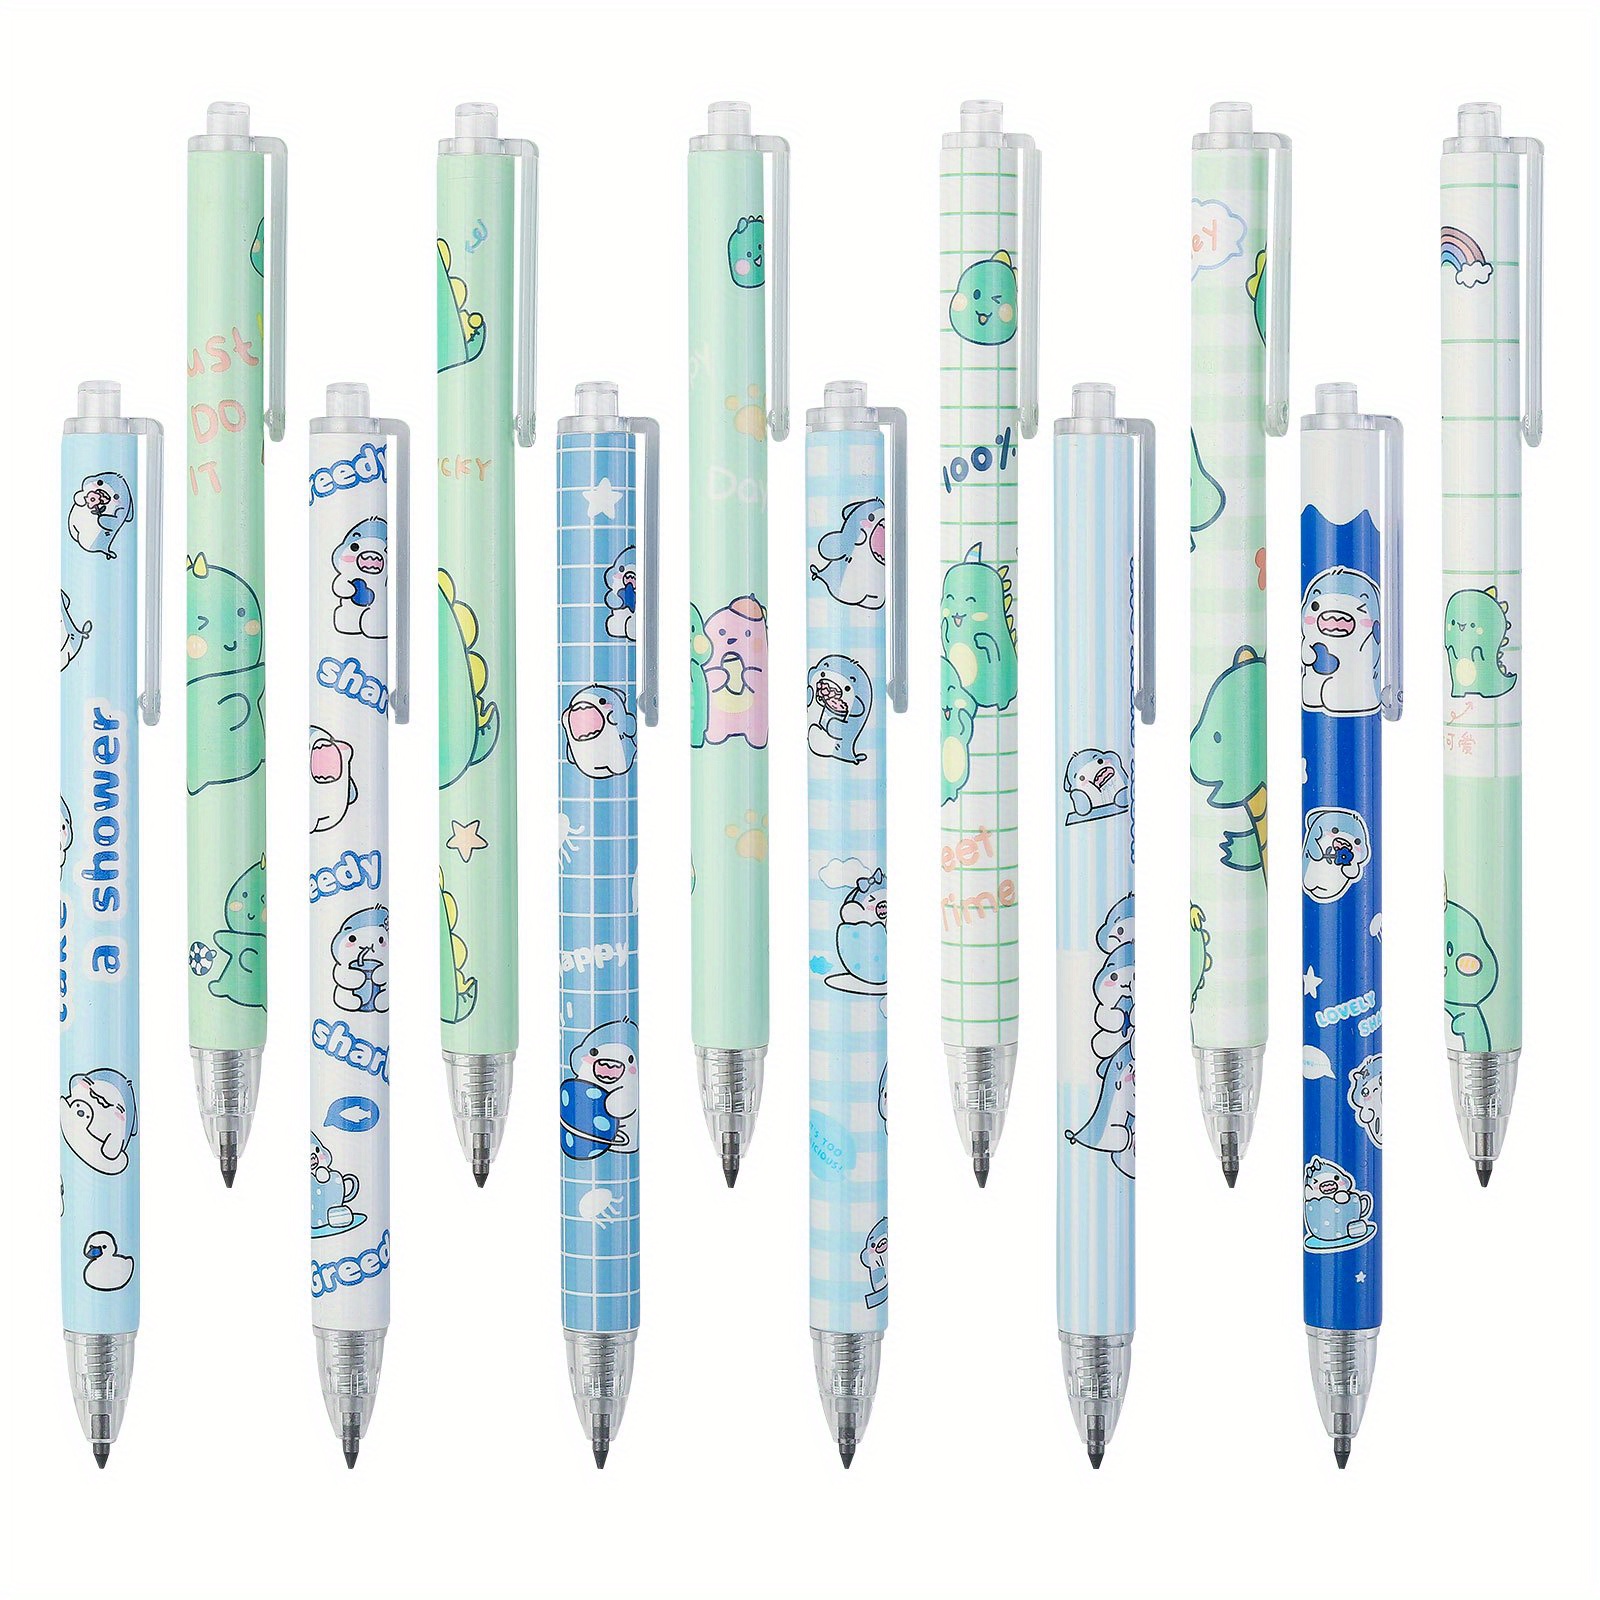 6 Sets Forever Pencils, Infinity Magic Pencils with Eraser, Cute Inkless Everlasting Pencil for Kids Writing, Sketching, DRAWING. (6 Pencils + 6